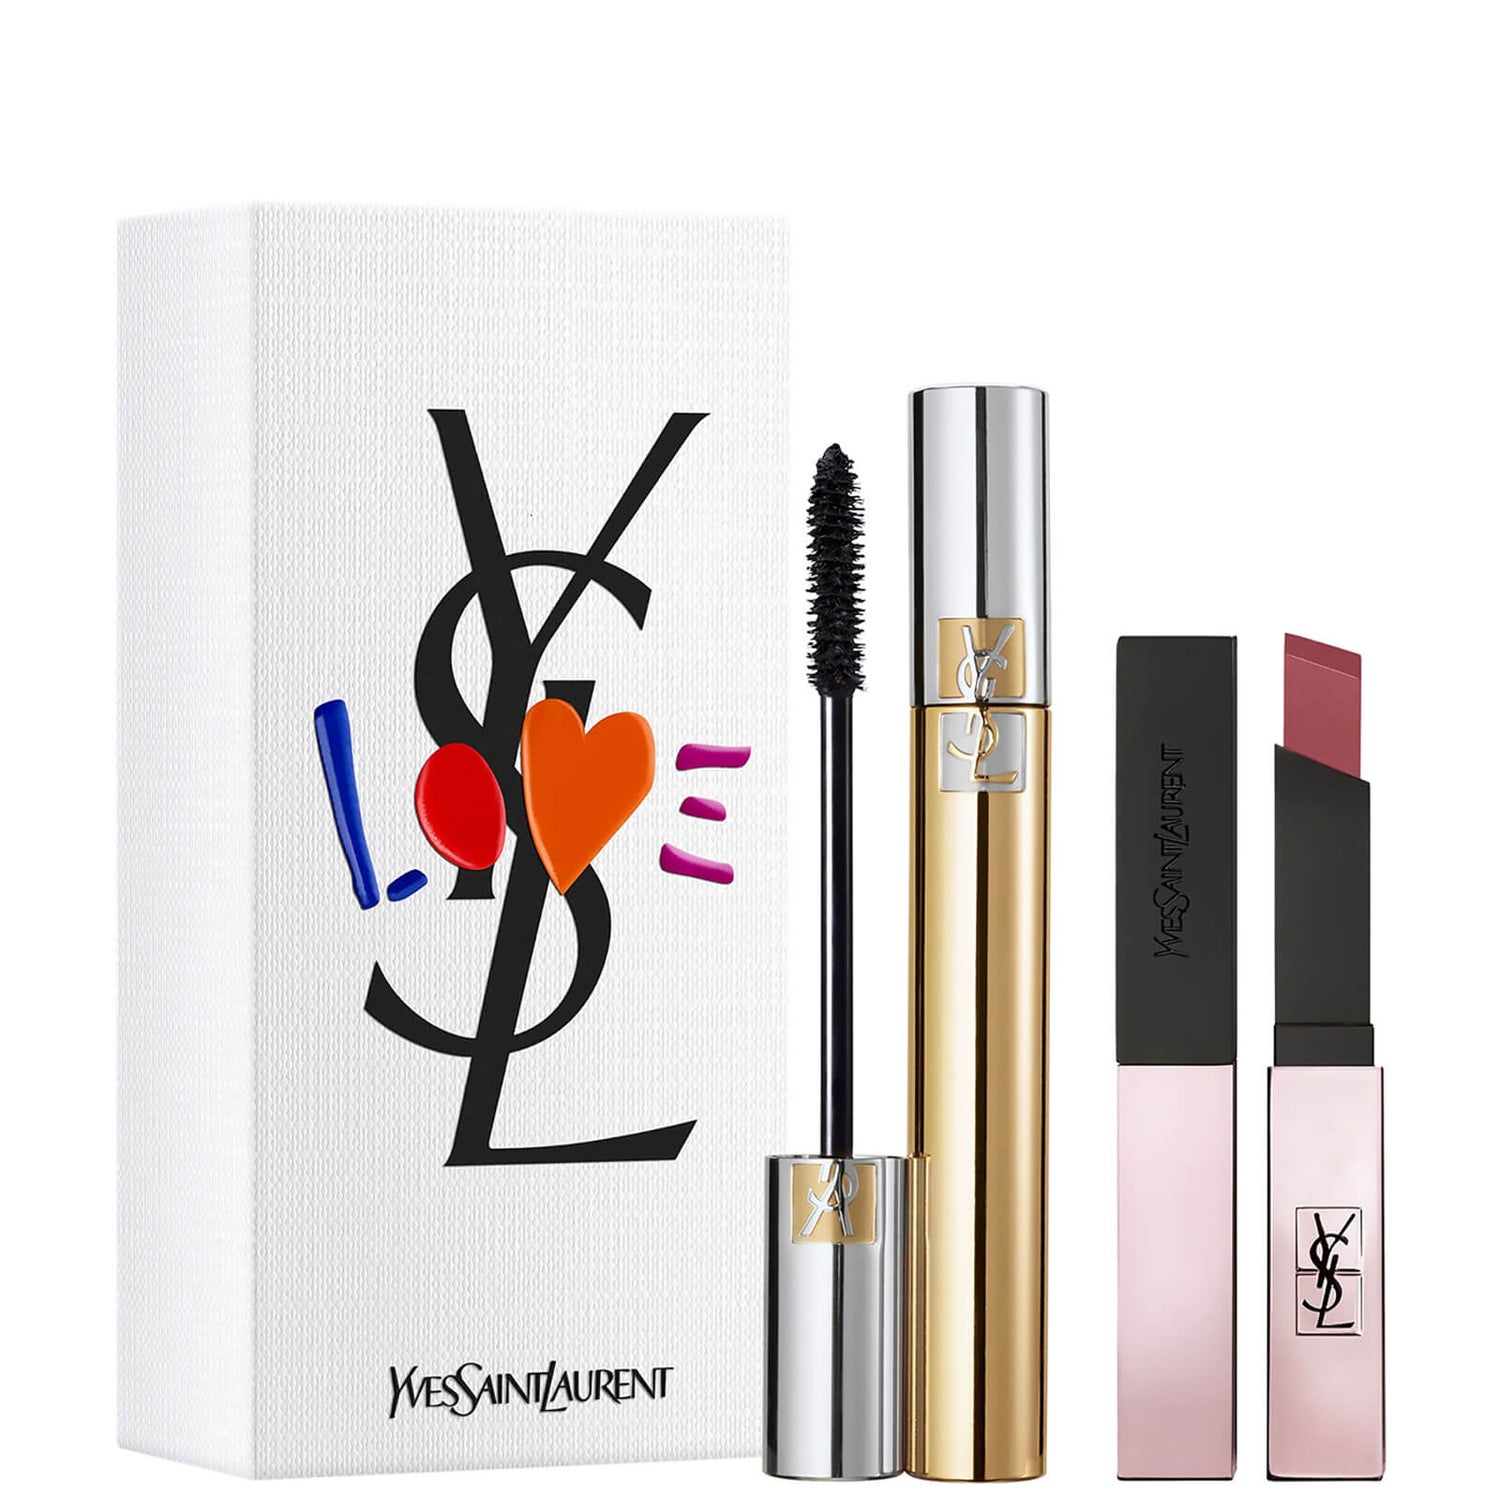 YSL Mascara Volume Effet Faux Cils and The Slim Lipstick Duo